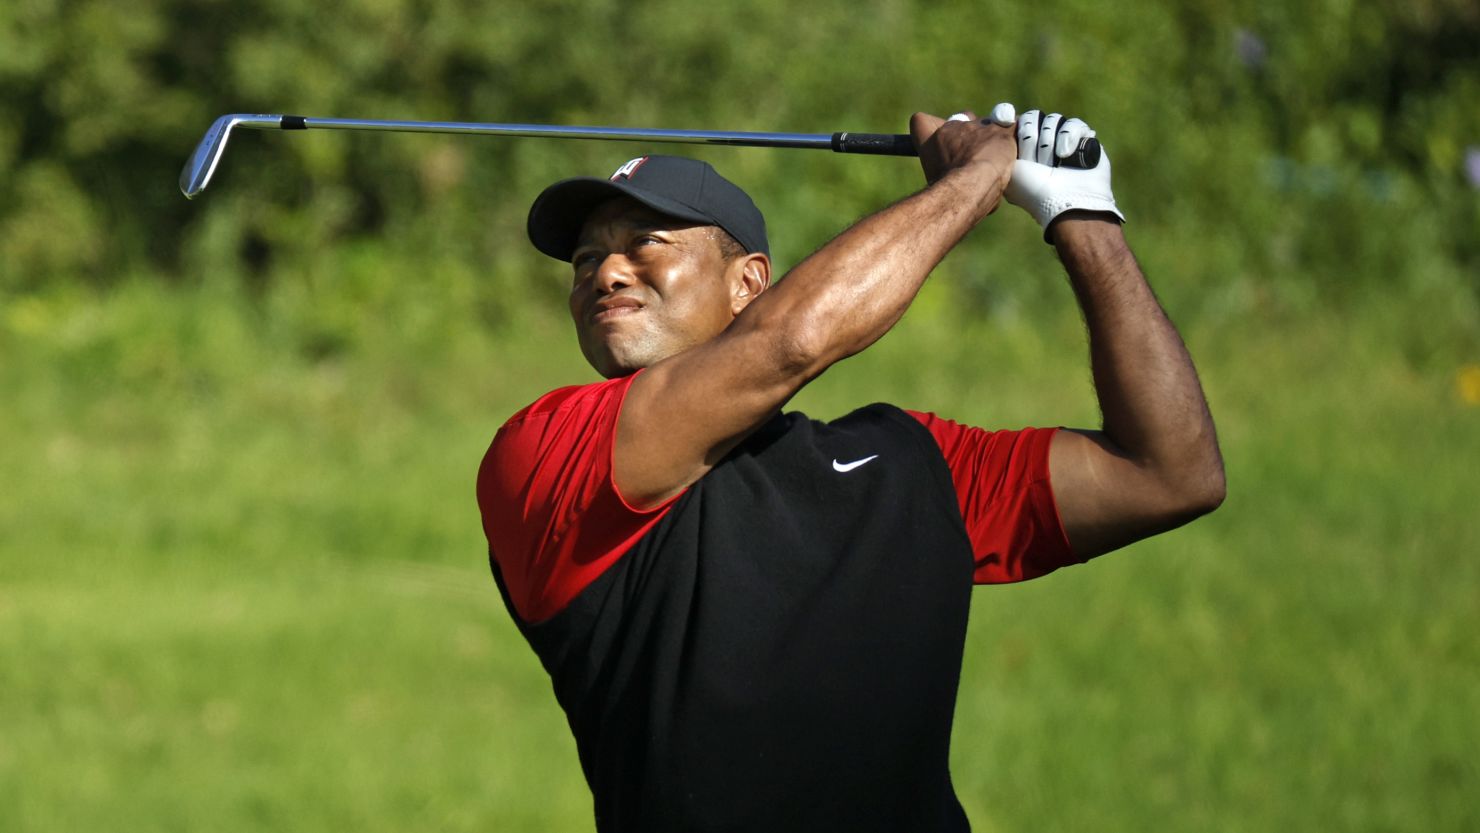 Tiger Woods produced his best golf since returning from injuries sustained in a car crash.